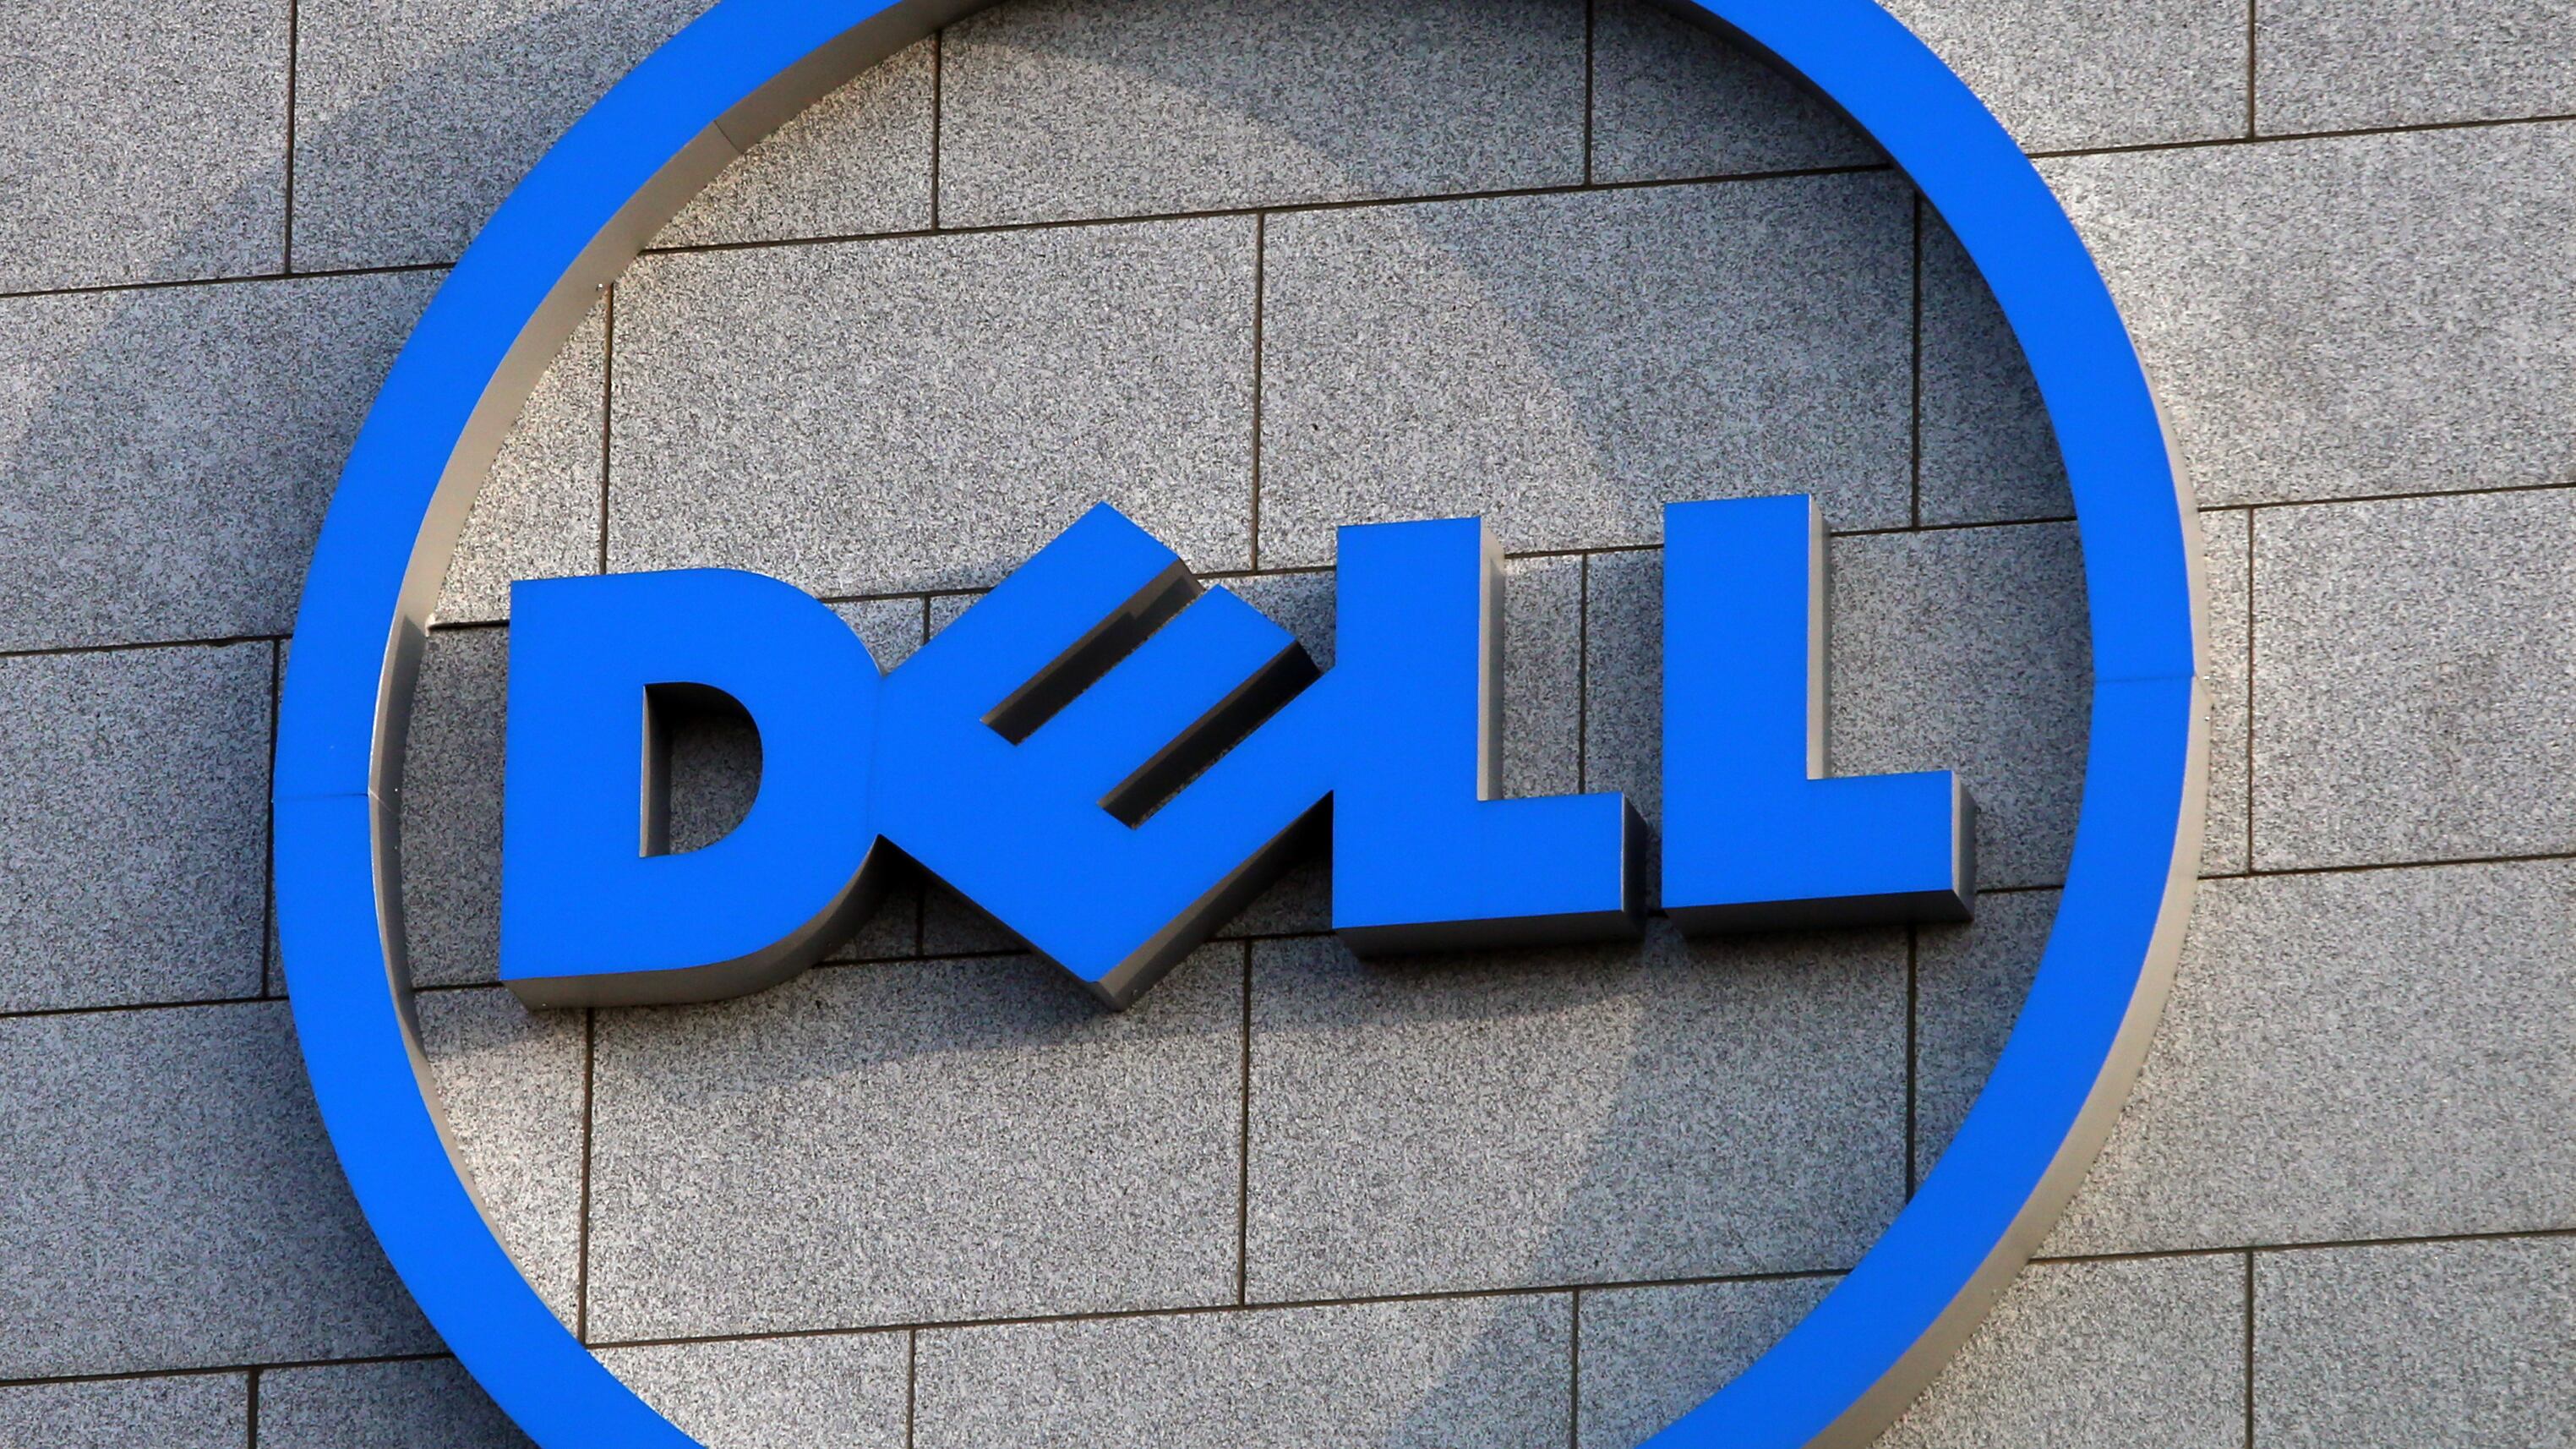 Computing giant Dell has confirmed it is investigating a data breach